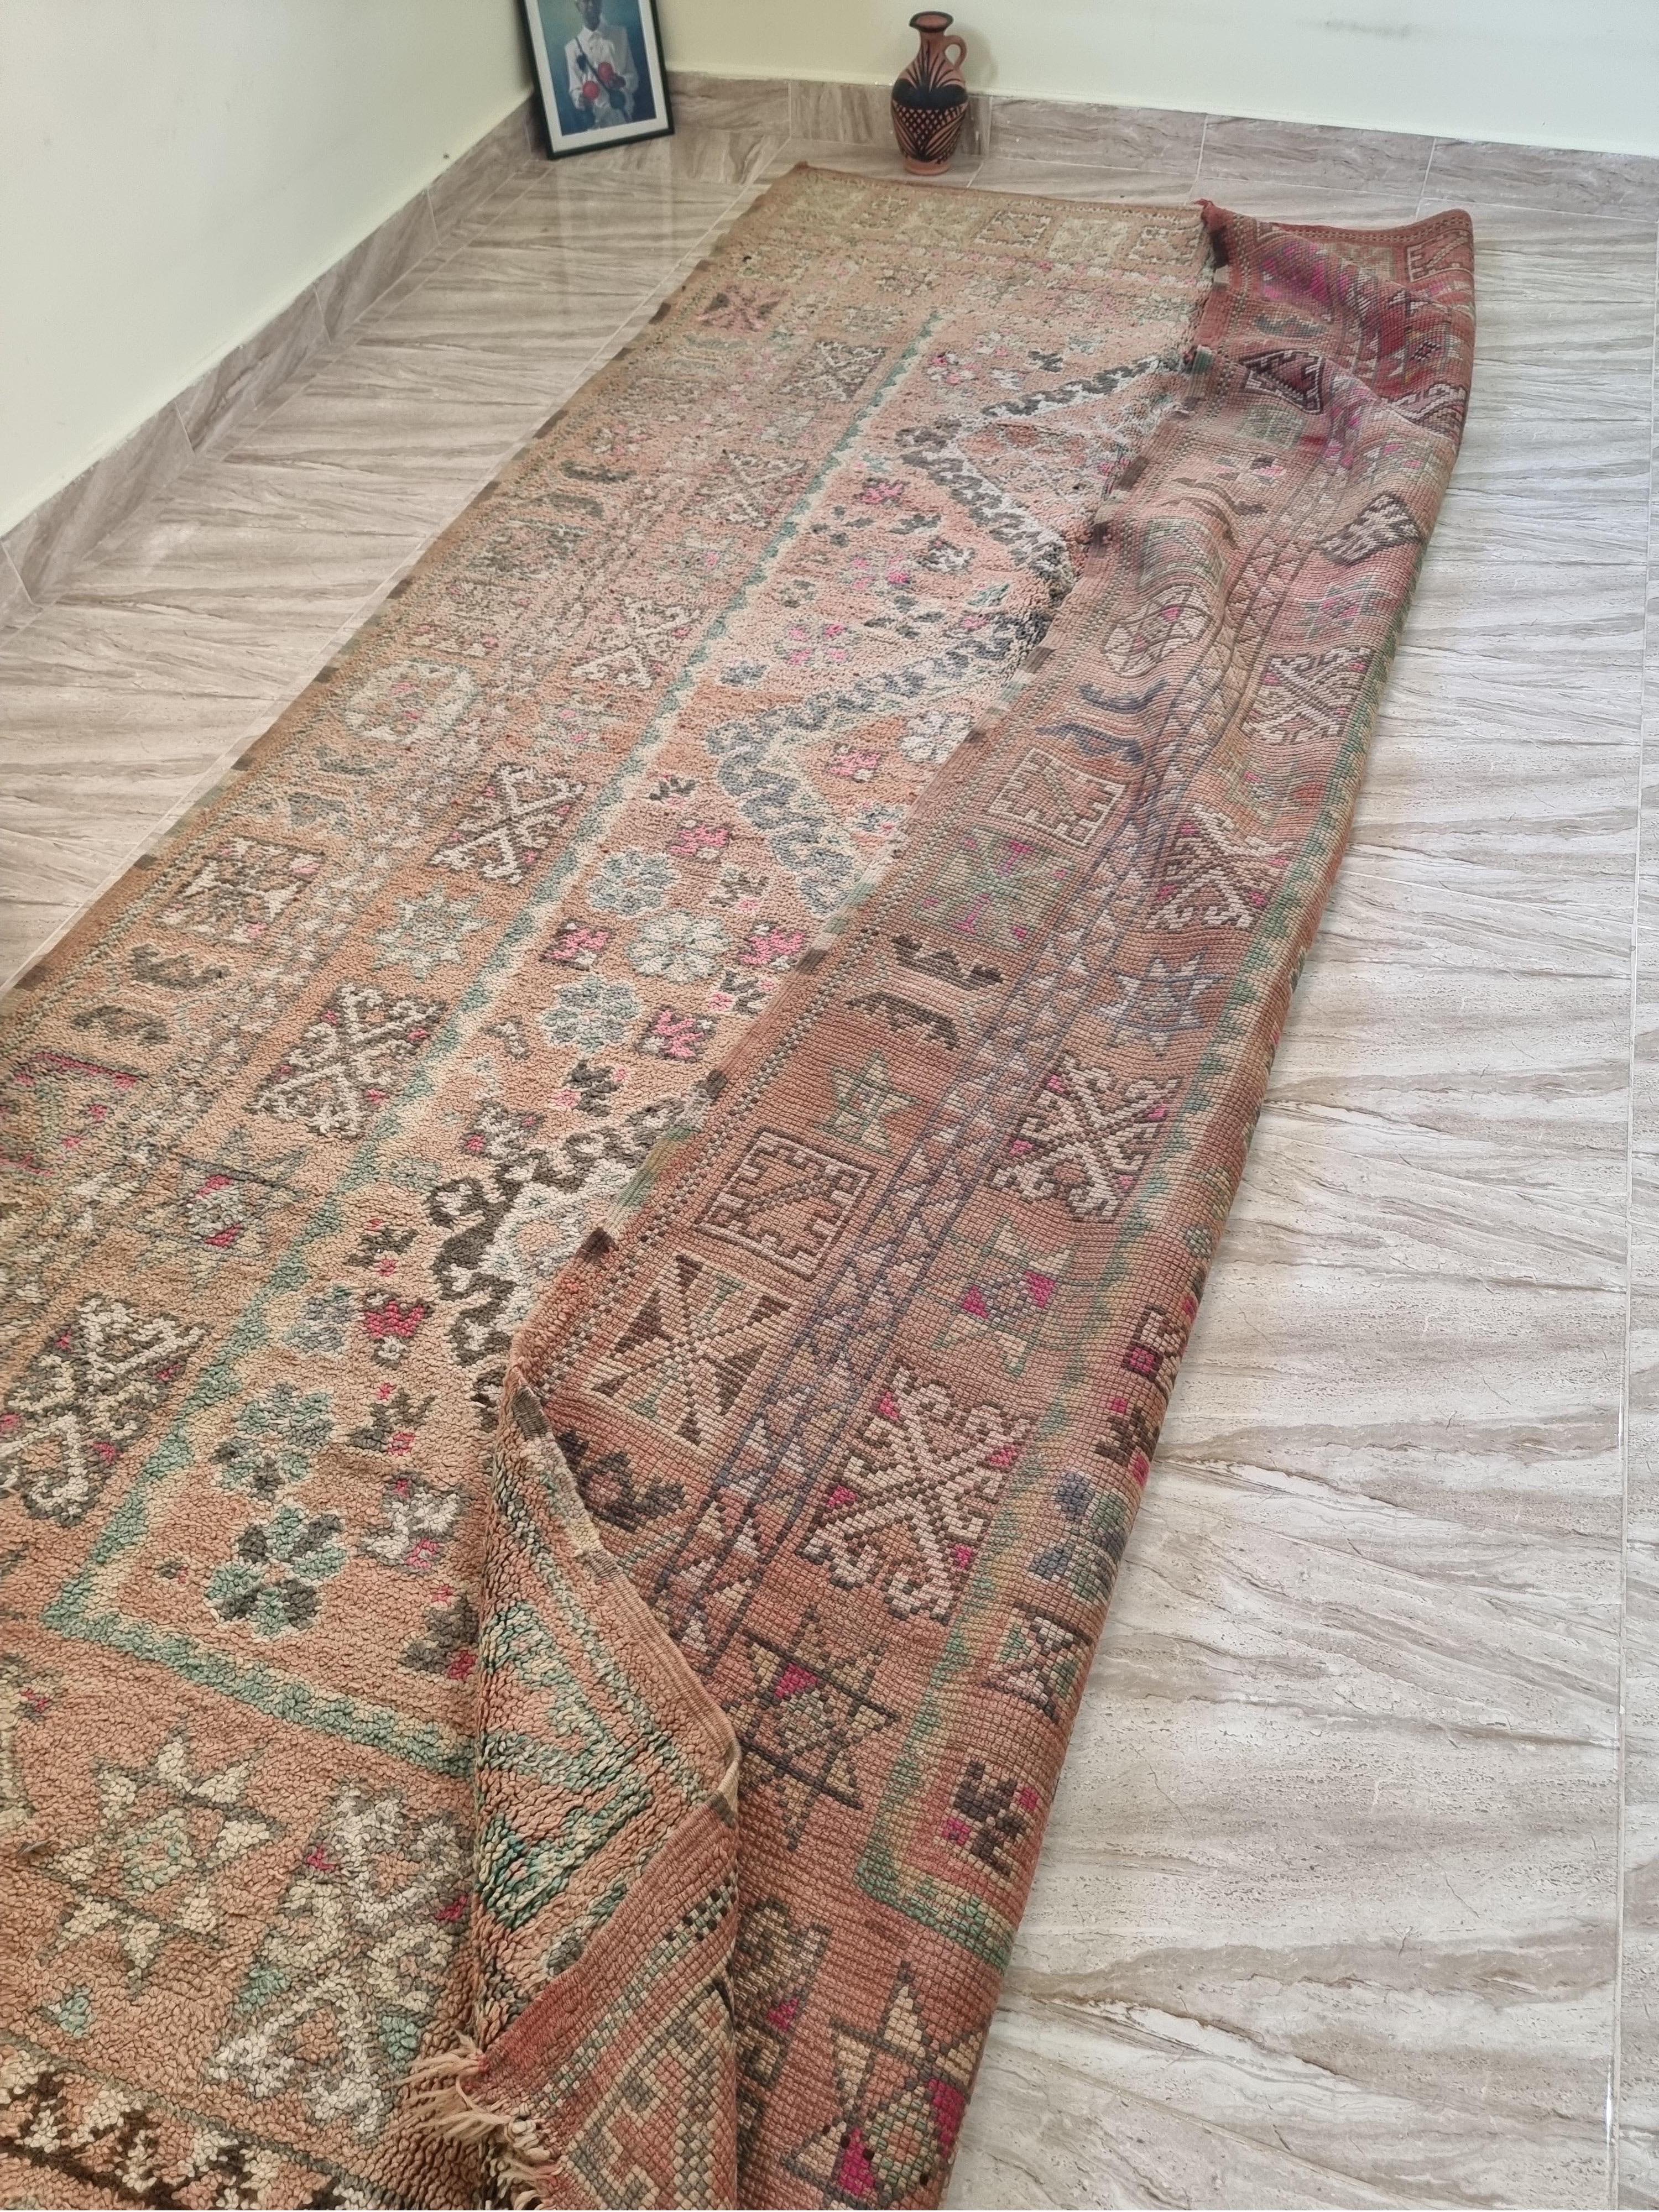 Rare vintage Moroccan Rug.
Every rug owns its unique identity. Having a one of a kind rug at home with a beautiful backstory represents a life filled with historic and meaningful backgrounds. Each and every one of our rugs take long hours to